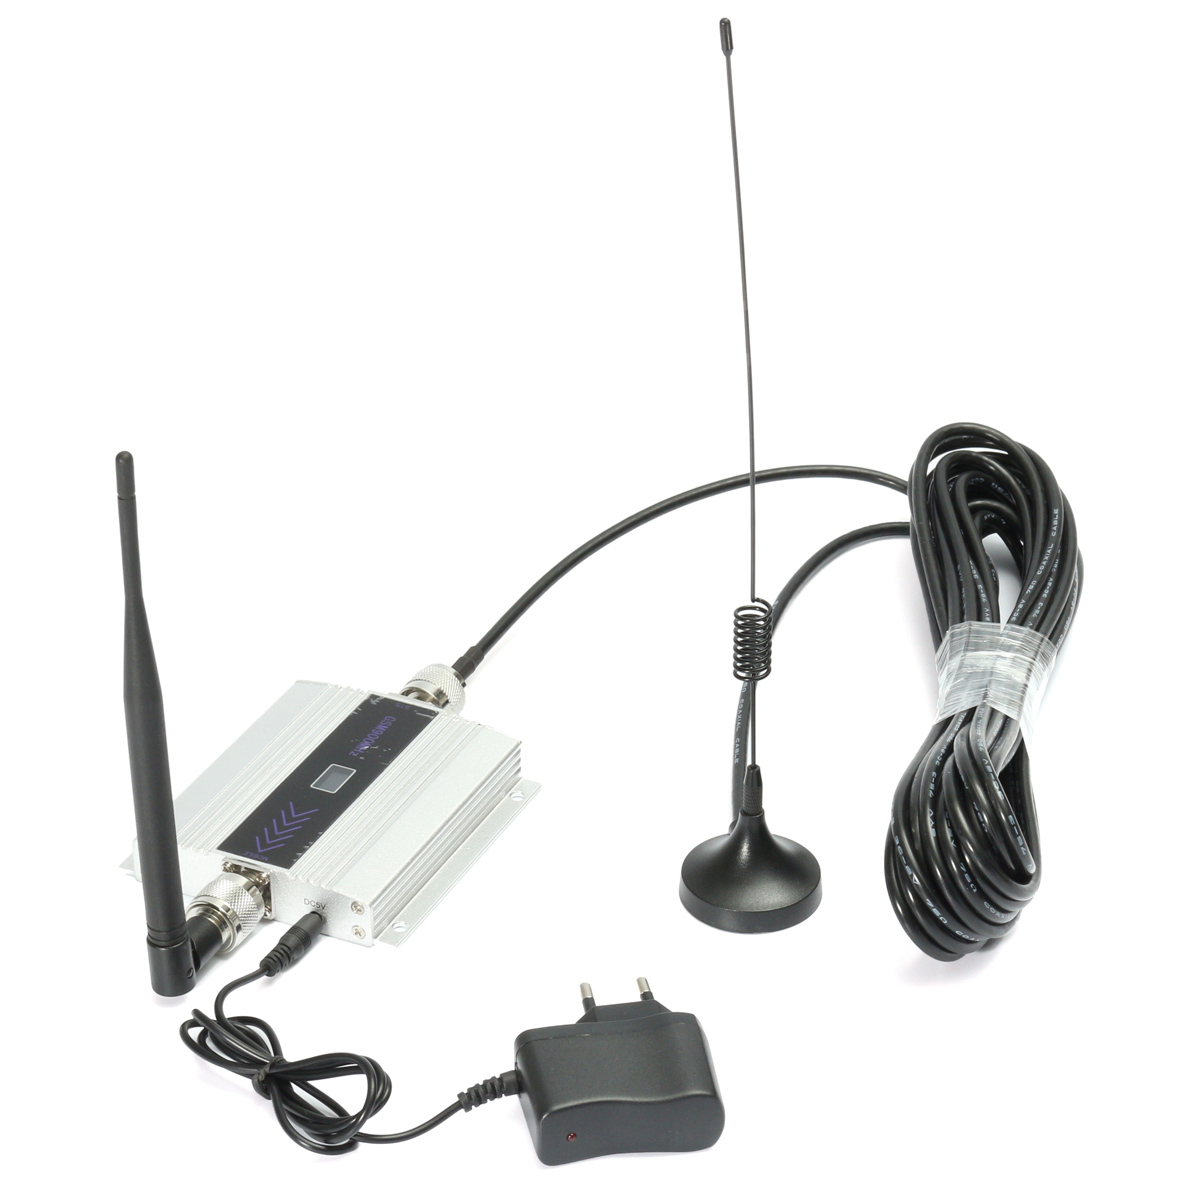 2G GSM 900mhz LCD Phone Signal Booster Repeater